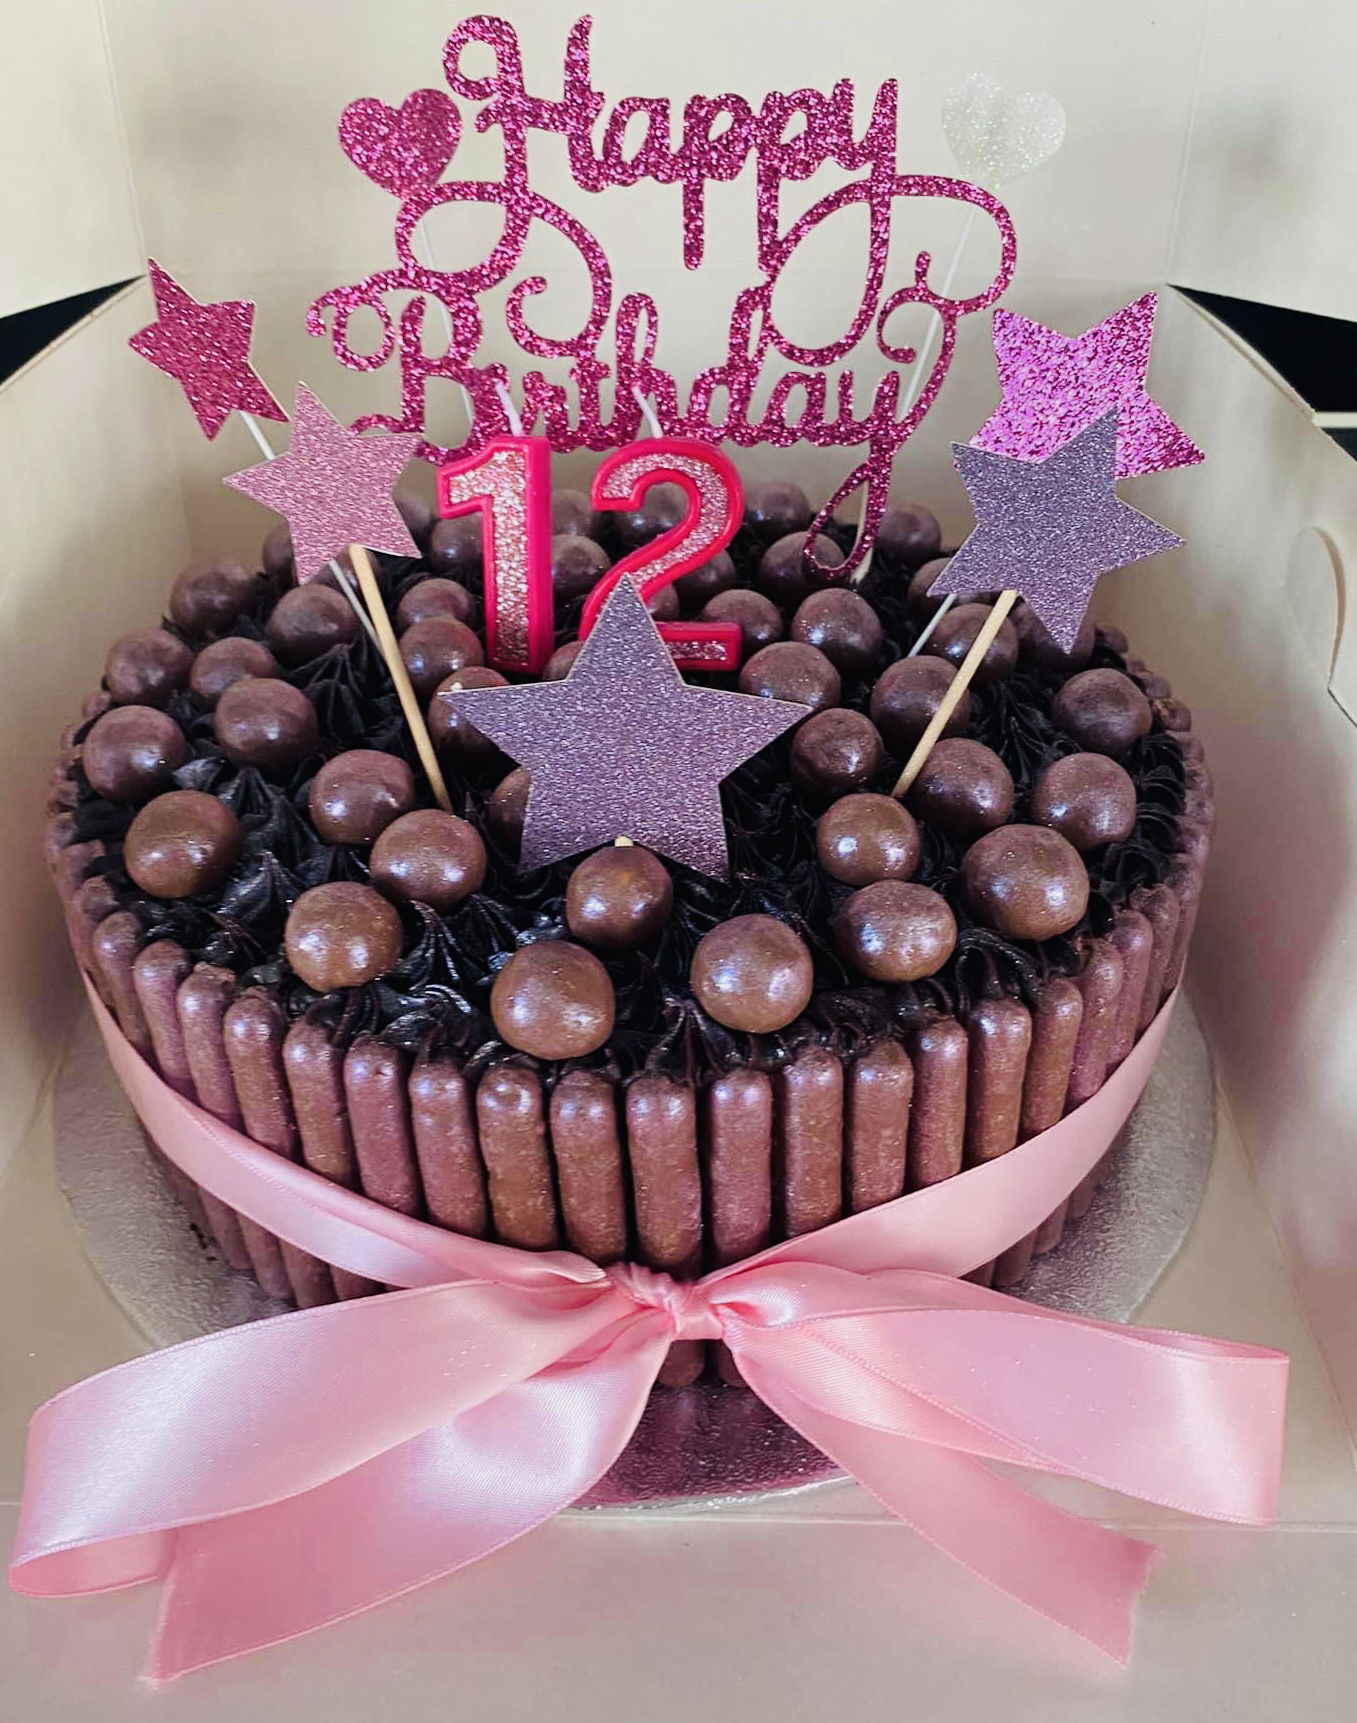 2 Layer Chocolate Overload Birthday Cake with Buttercream Frosting and Chocolate Candies